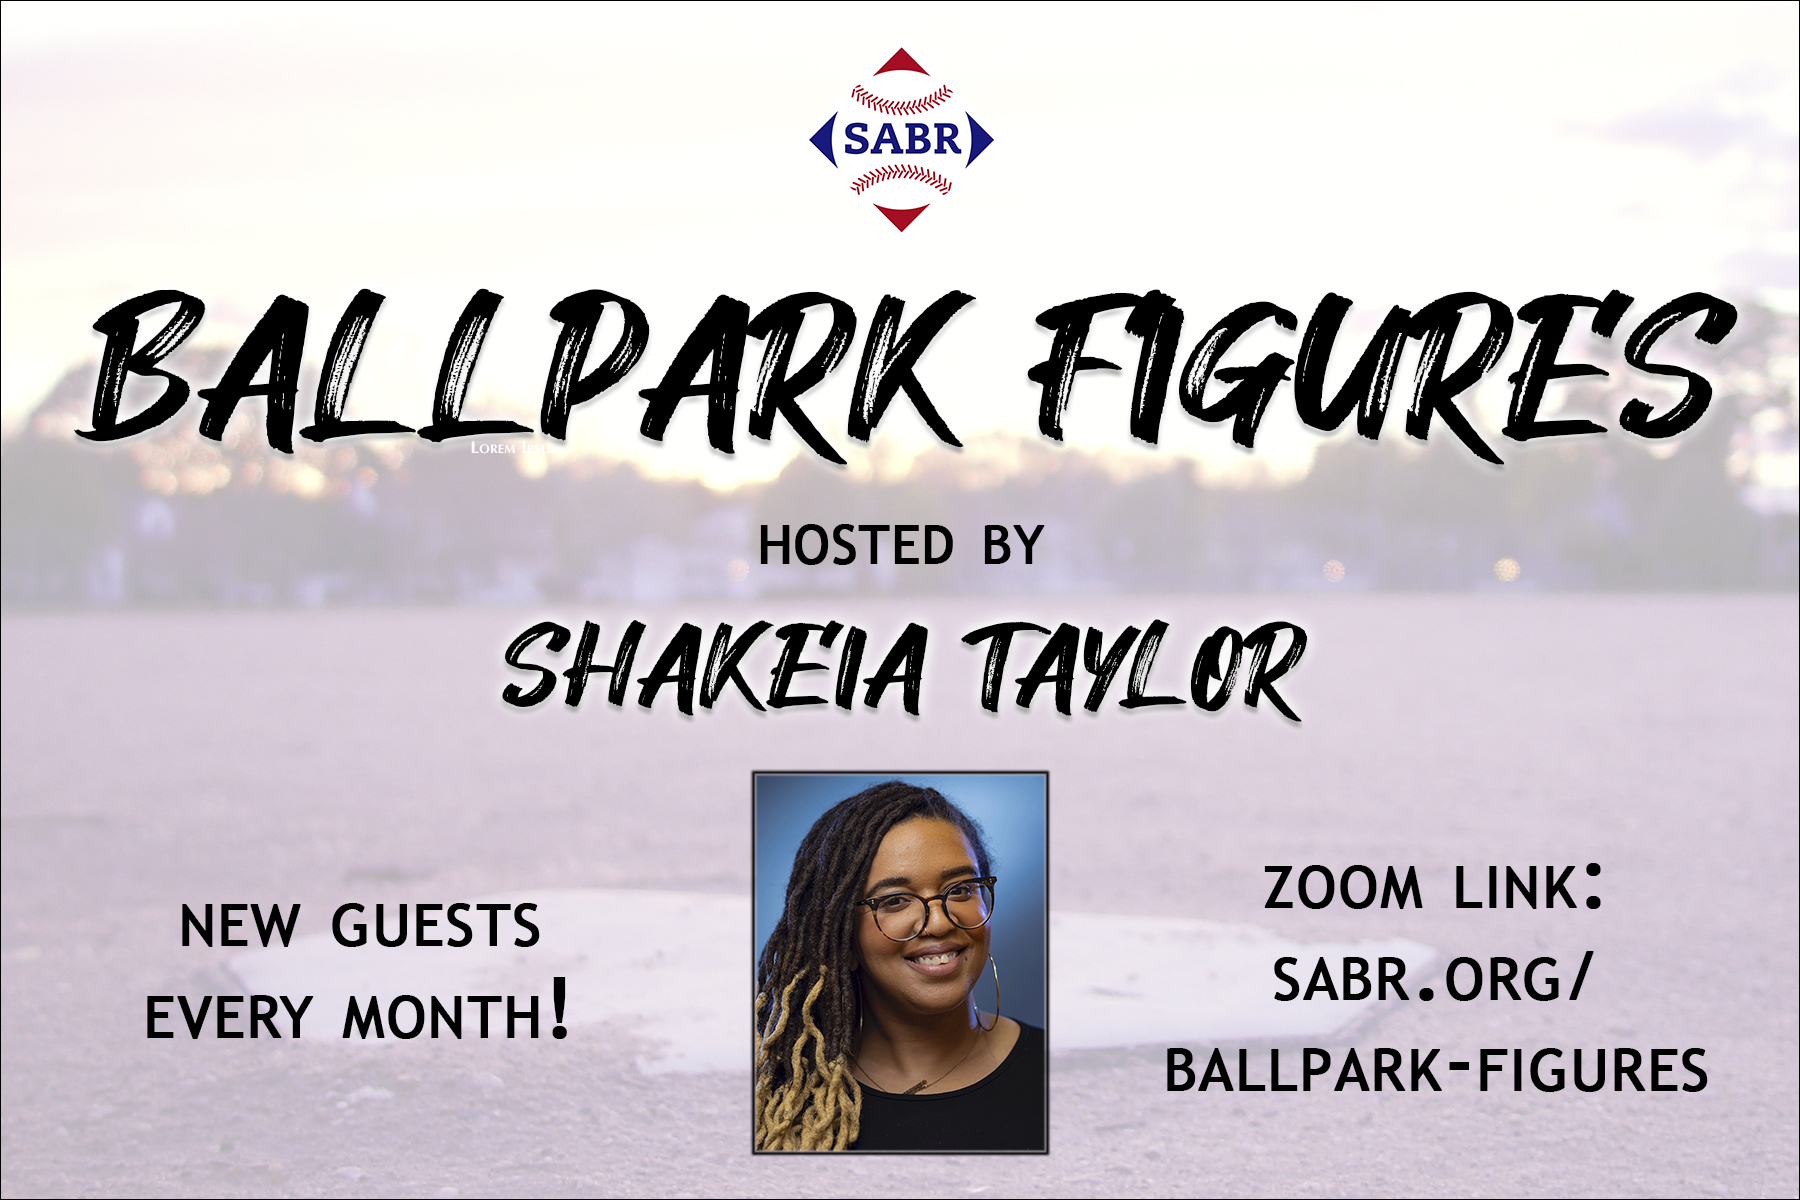 SABR Ballpark Figures, hosted by Shakeia Taylor